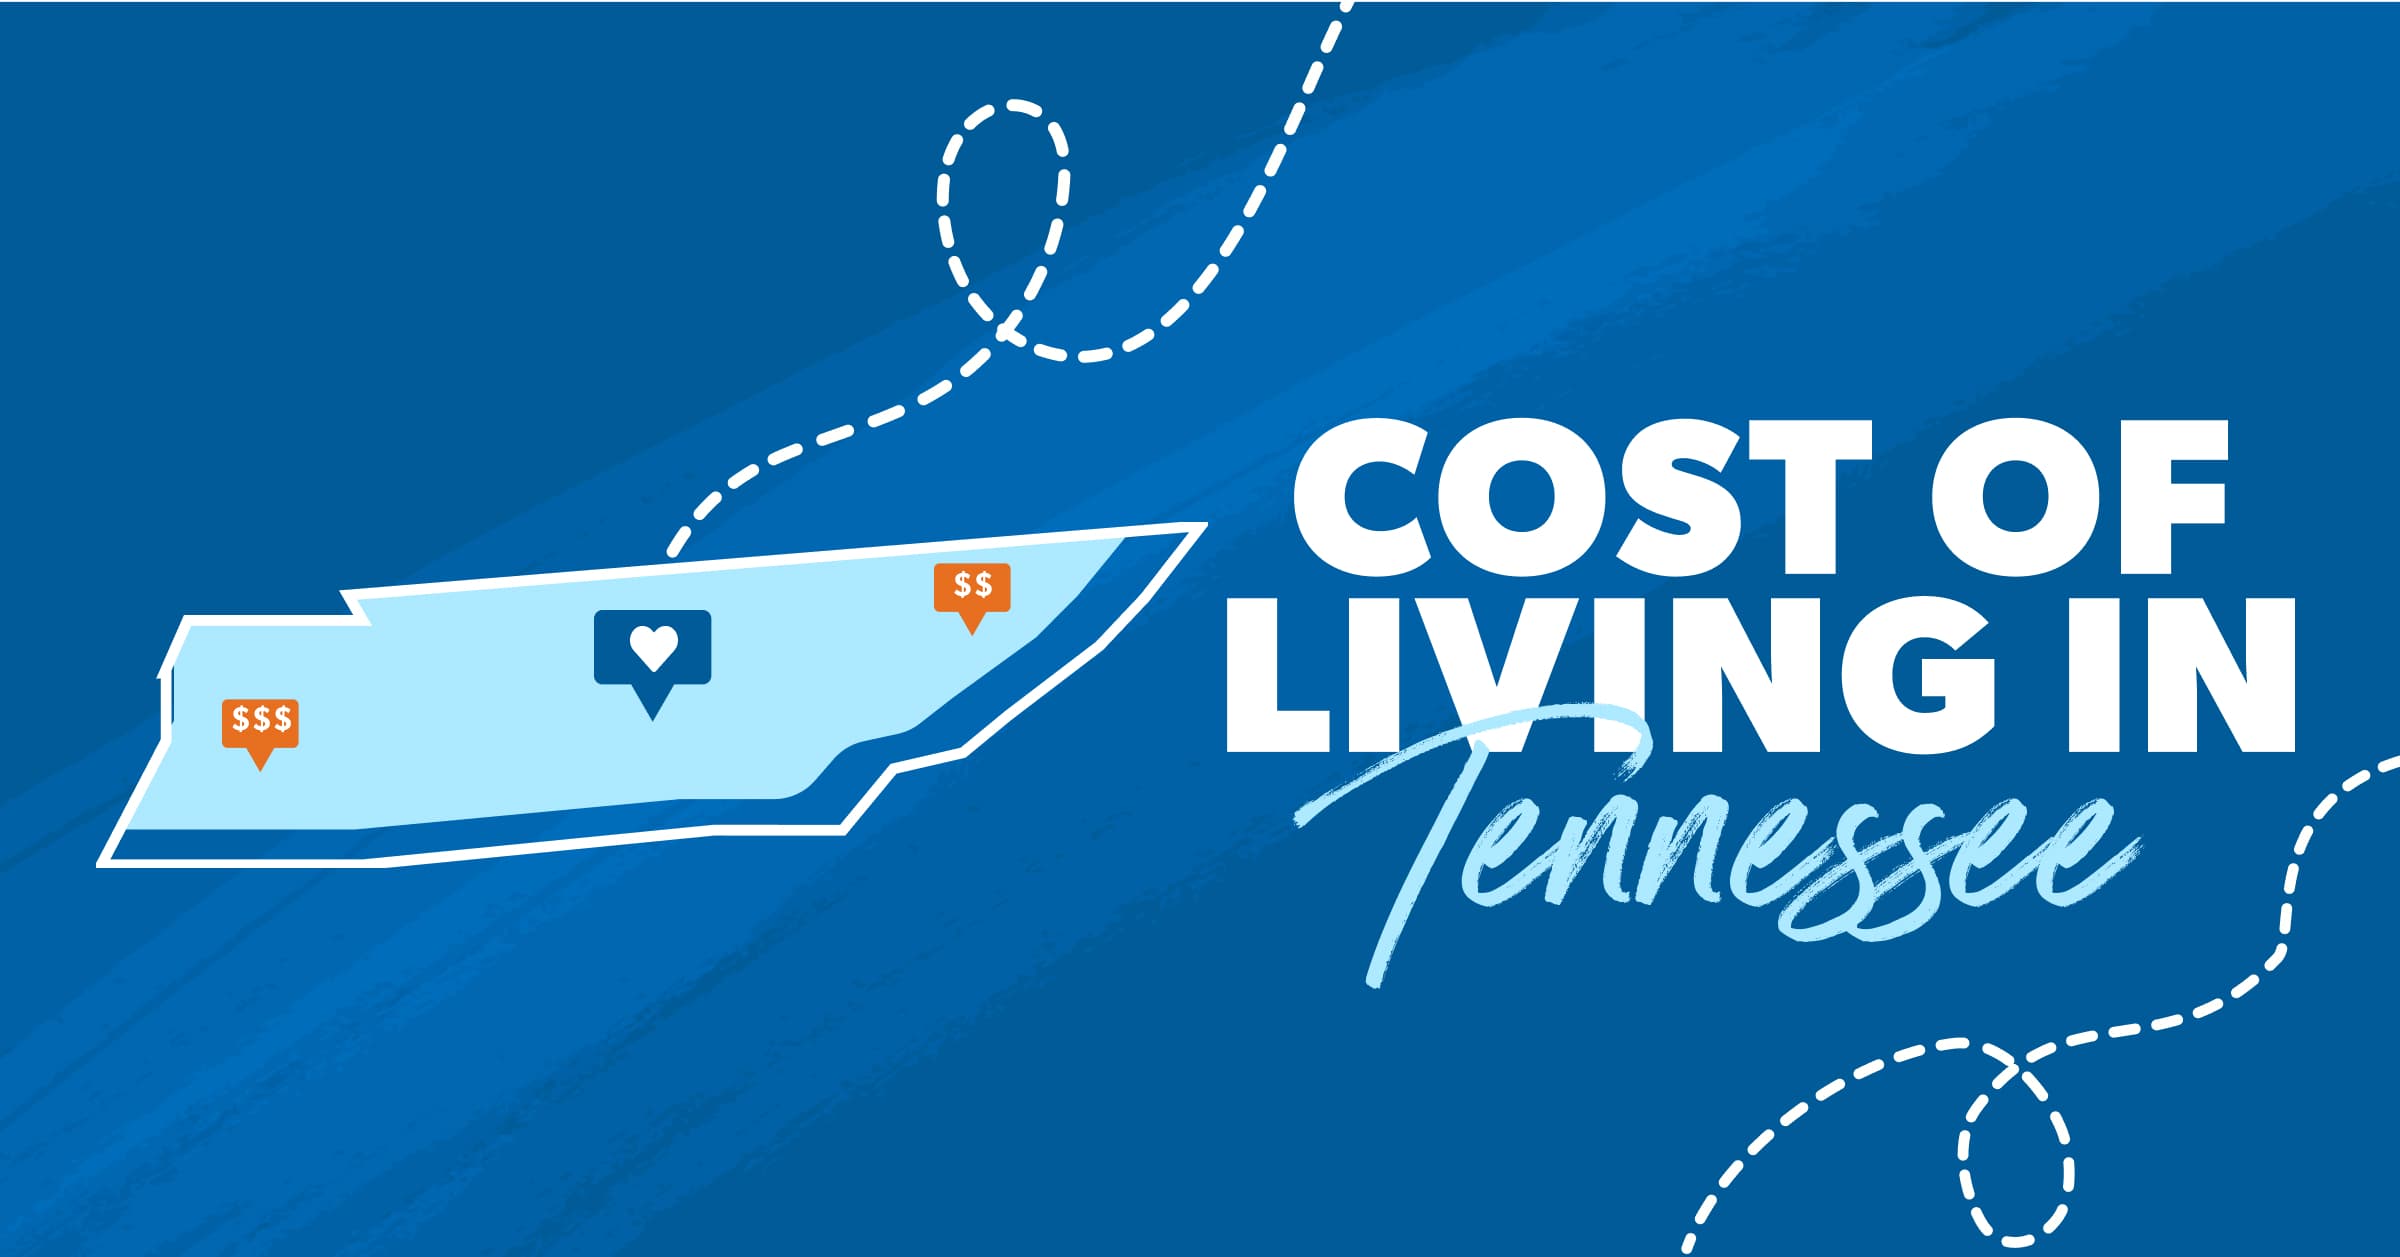 Cost of Living in Tennessee